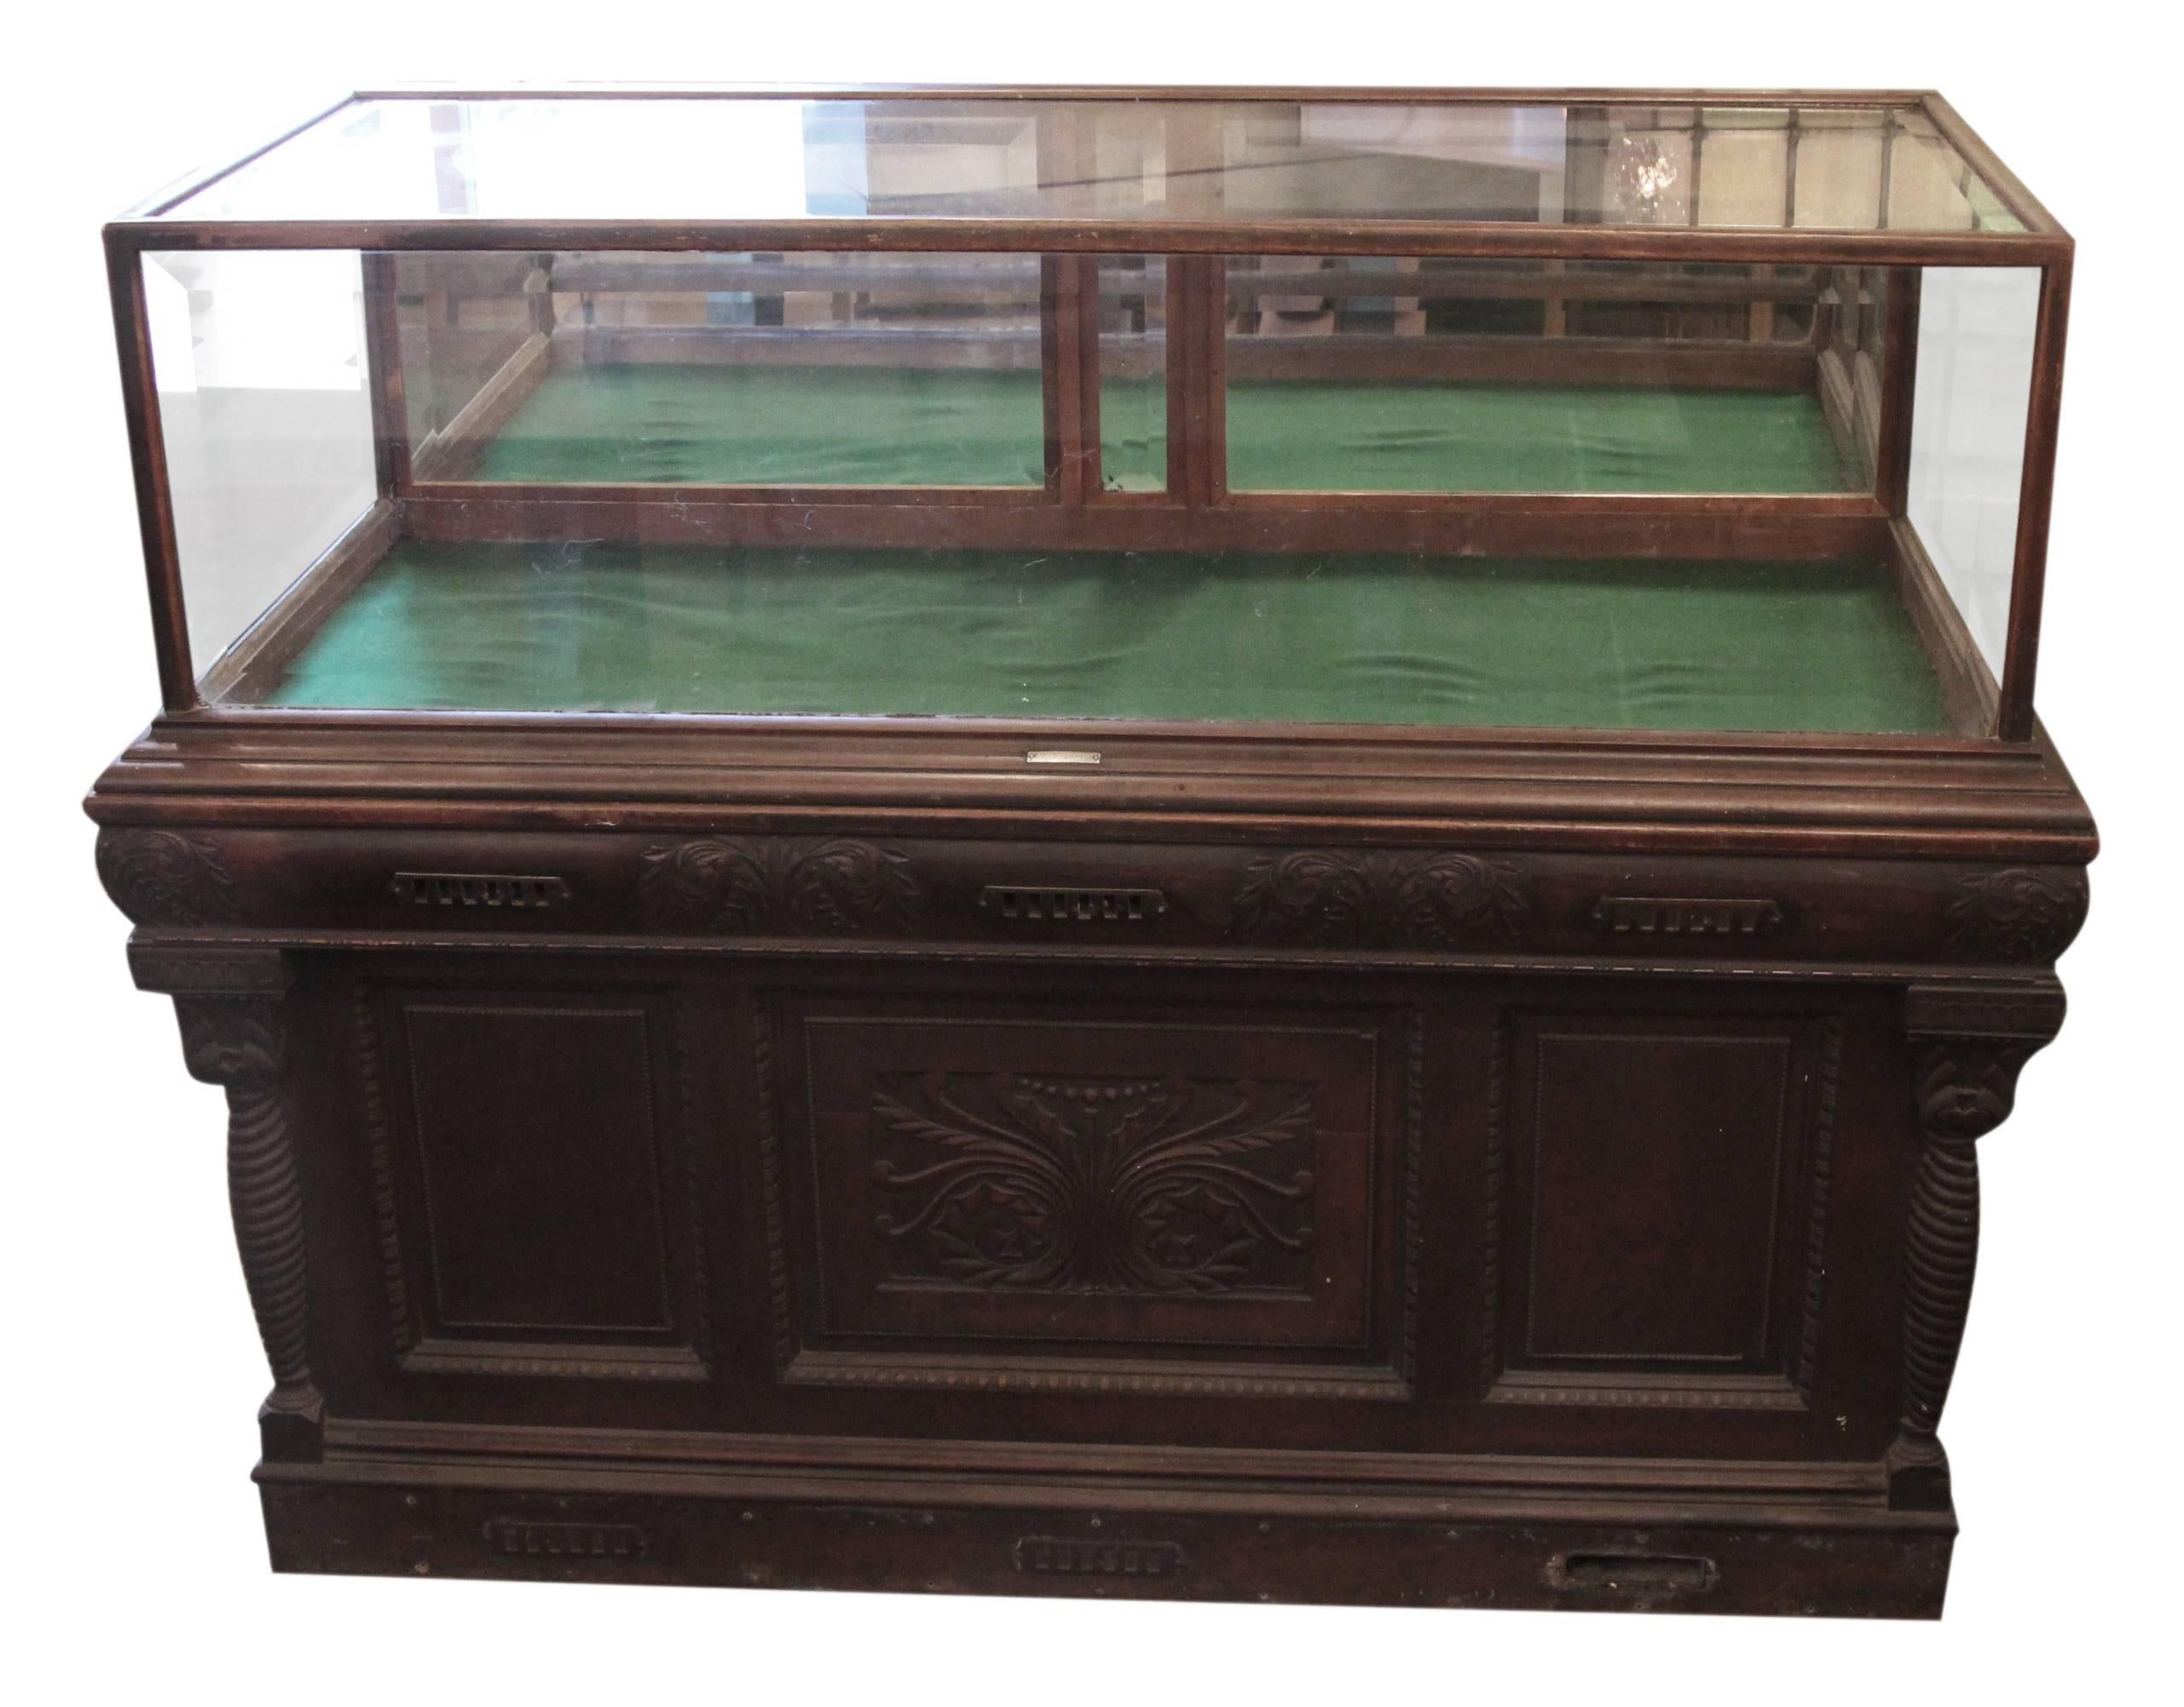 1800s carved oak framed cigar humidor with oak glass showcase on top by Whitcomb Cabinet Co. Features beveled glass with two pull down mirrored doors. The base is the humidor, and the brass vents are on the front and back. There are drawers and